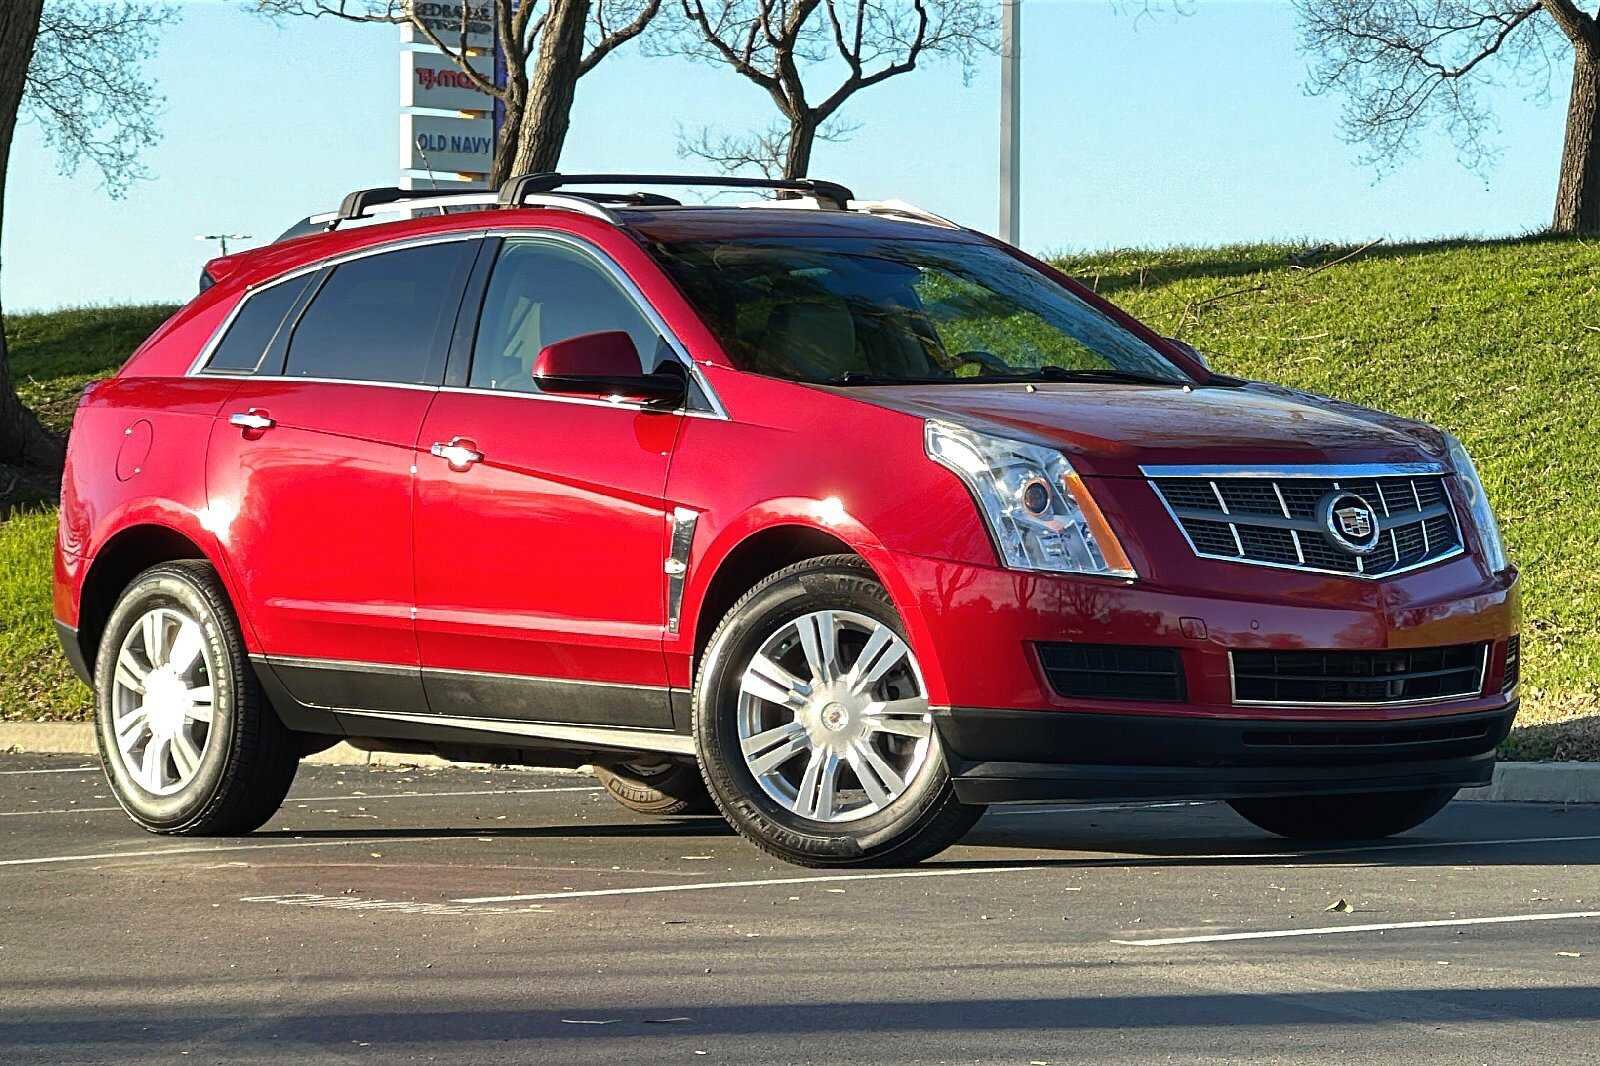 Pre-Owned 2011 Cadillac SRX Luxury Collection SUV in Cary #PA11327 |  Hendrick Buick GMC Cary